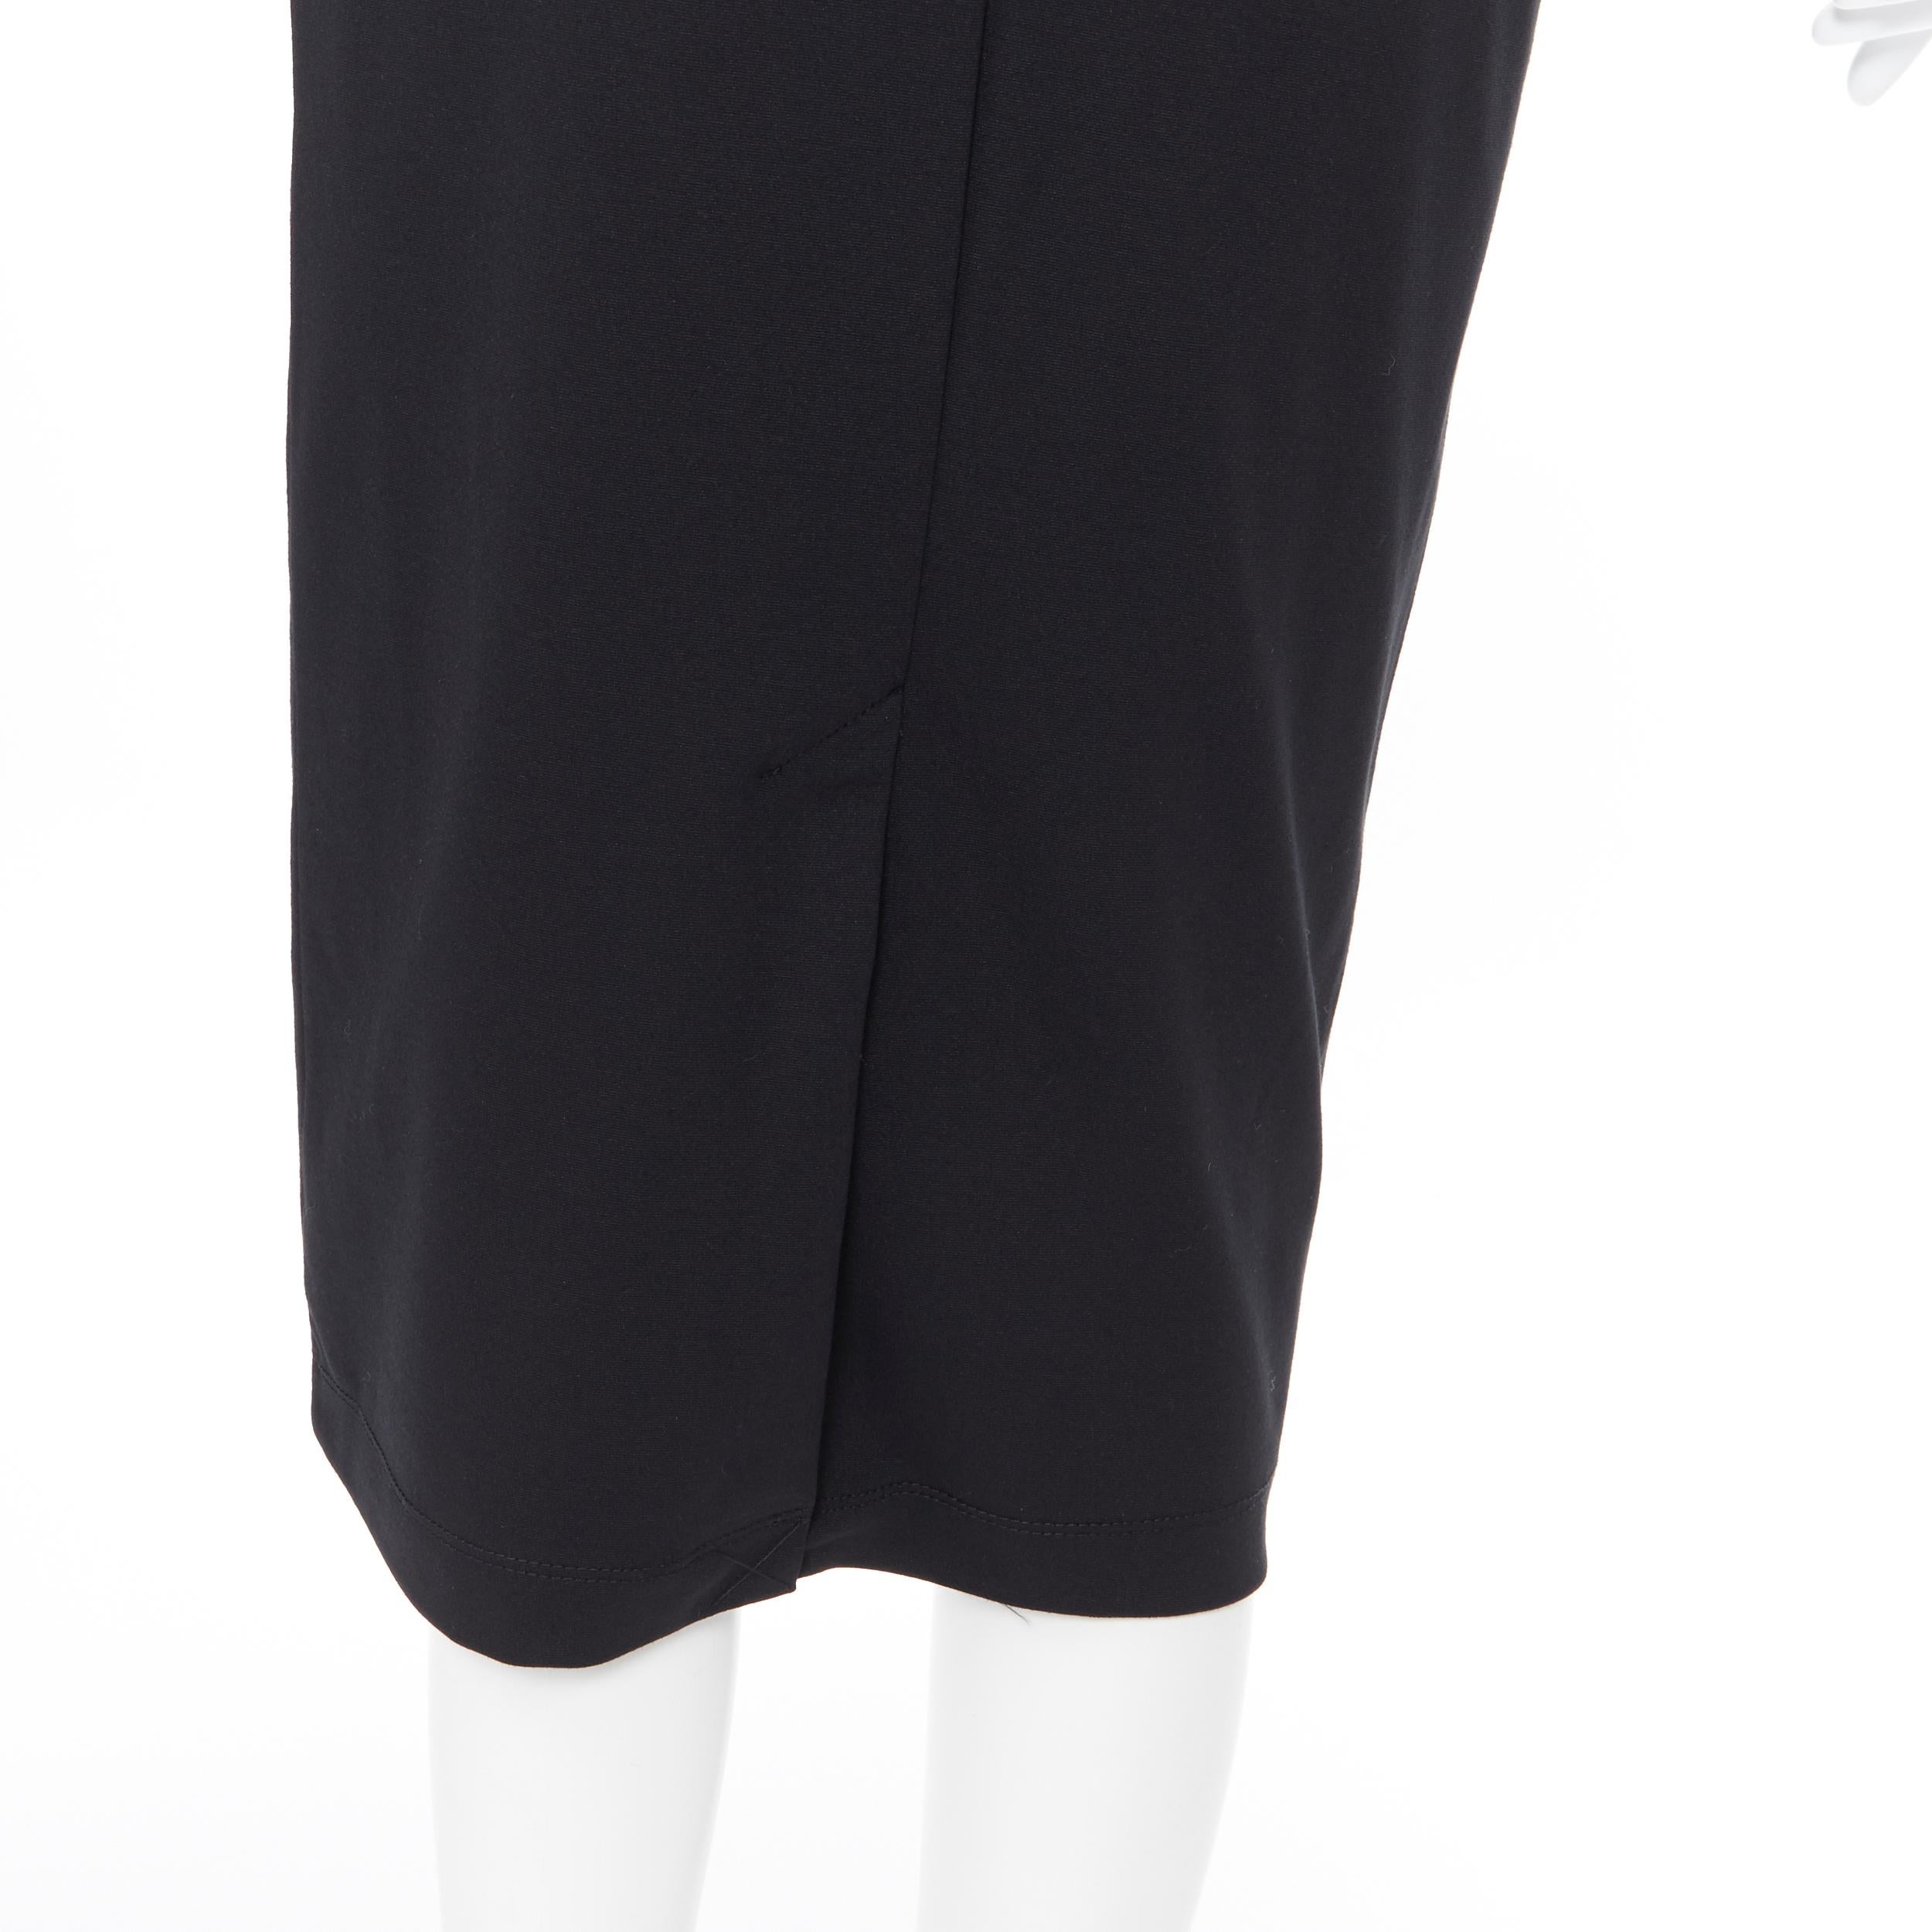 T BY ALEXANDER WANG black rayon polyester center slit stretch pencil skirt S
Brand: T by Aleexander Wang
Designer: Alexander Wang
Model Name / Style: Midi skirt
Material: Rayon, polyester
Color: Black
Pattern: Solid
Closure: Zip
Extra Detail: Center